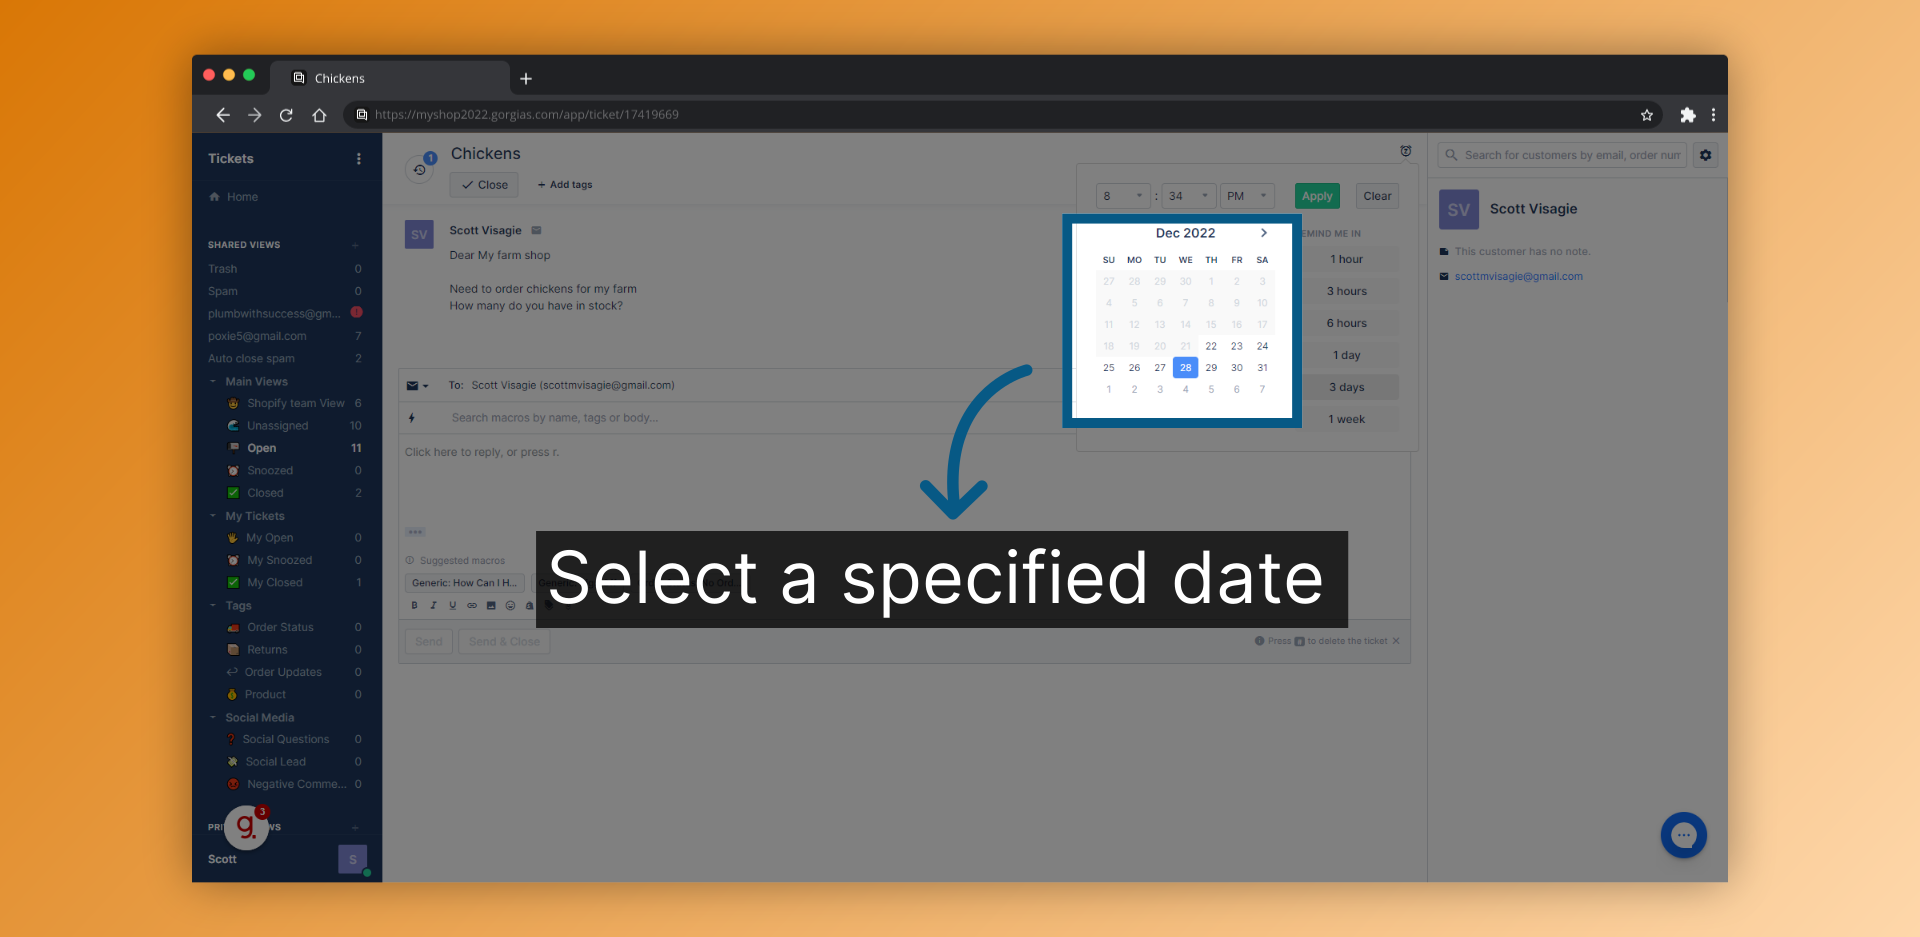 Select a specified date